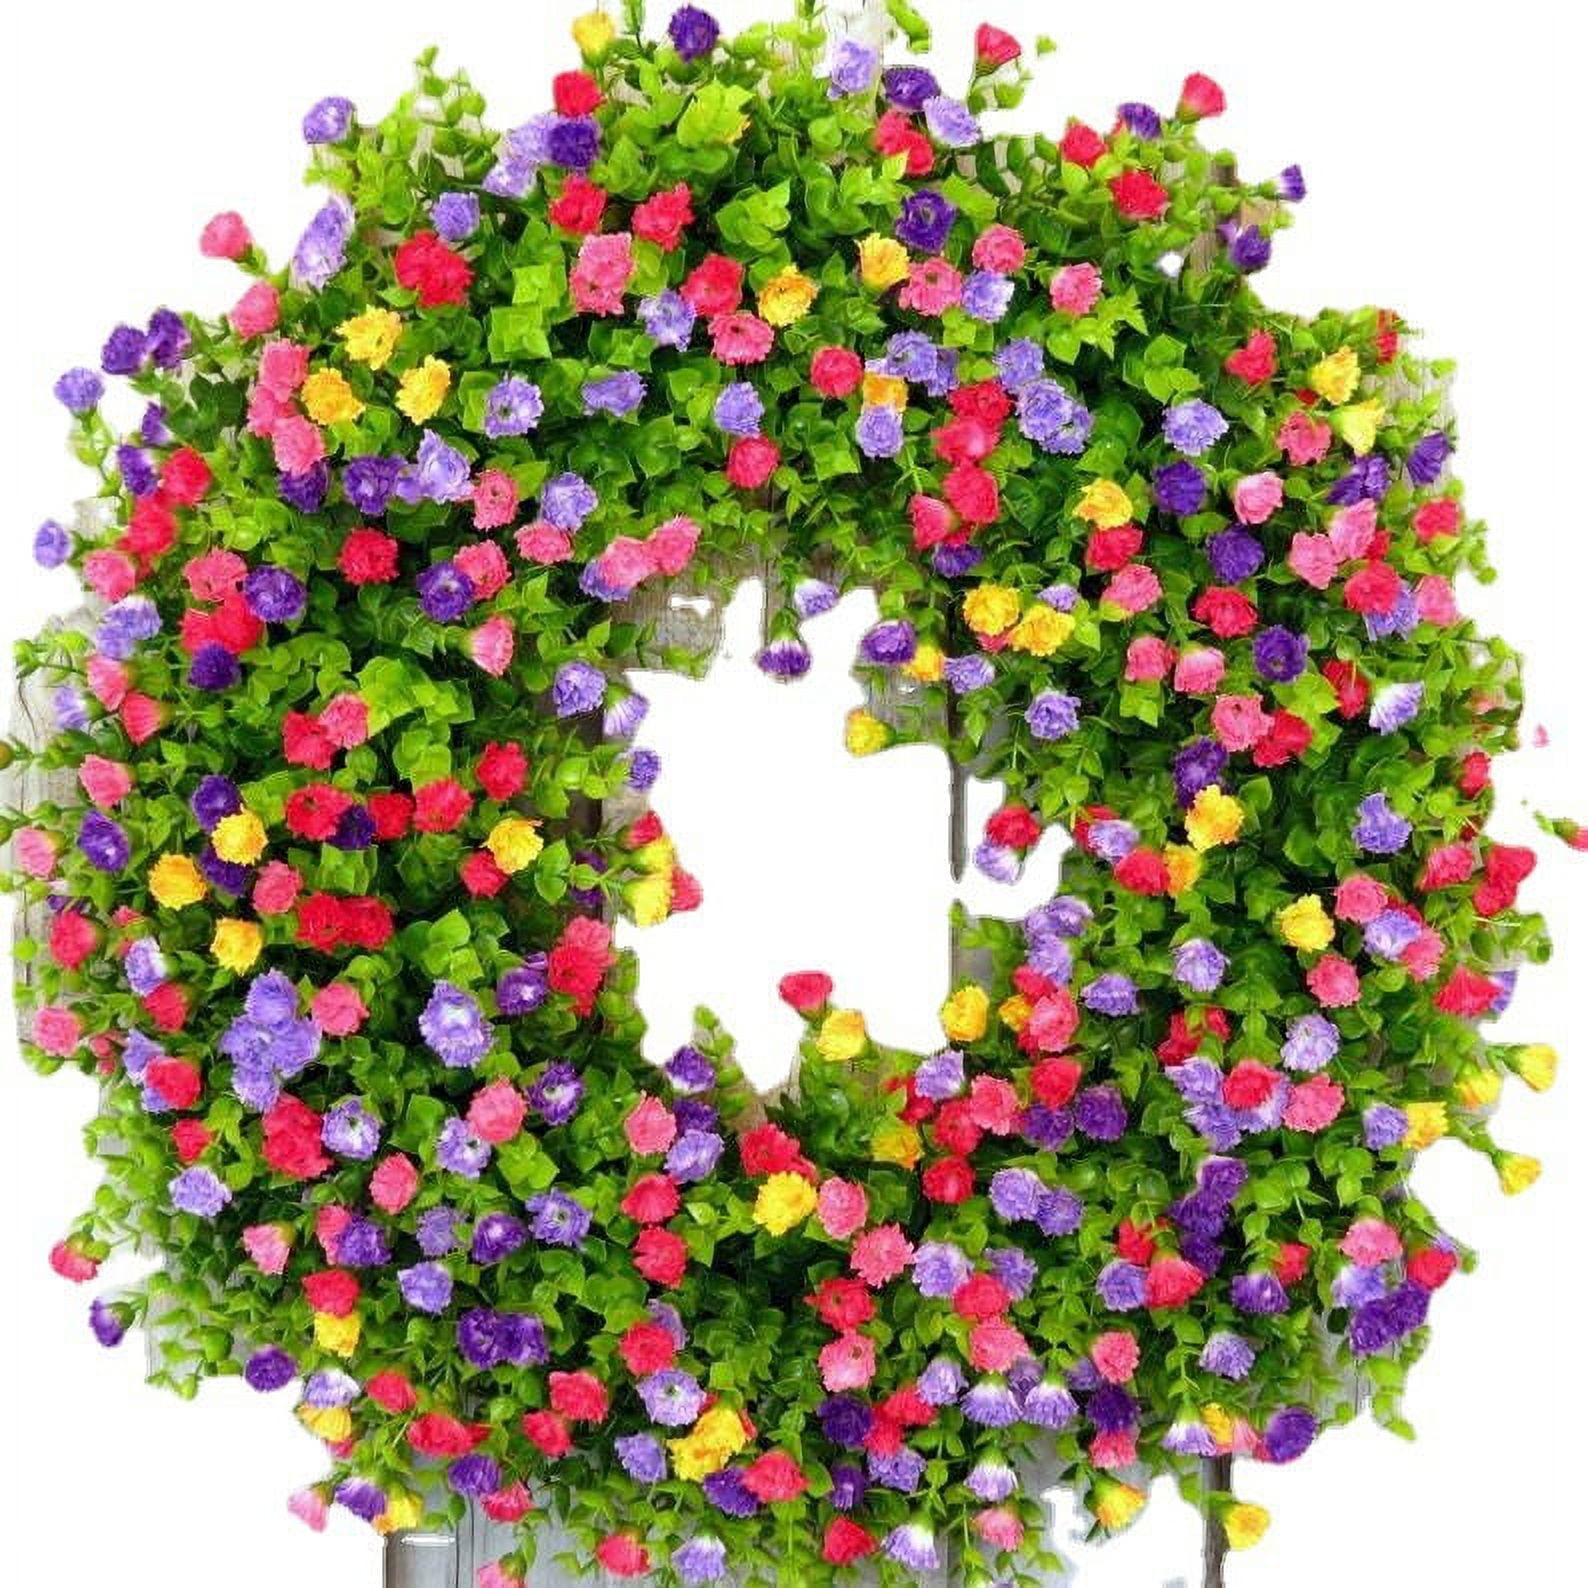 Lingouzi Colorful Wildflower Garland for Front Door with Immortal Flowers 